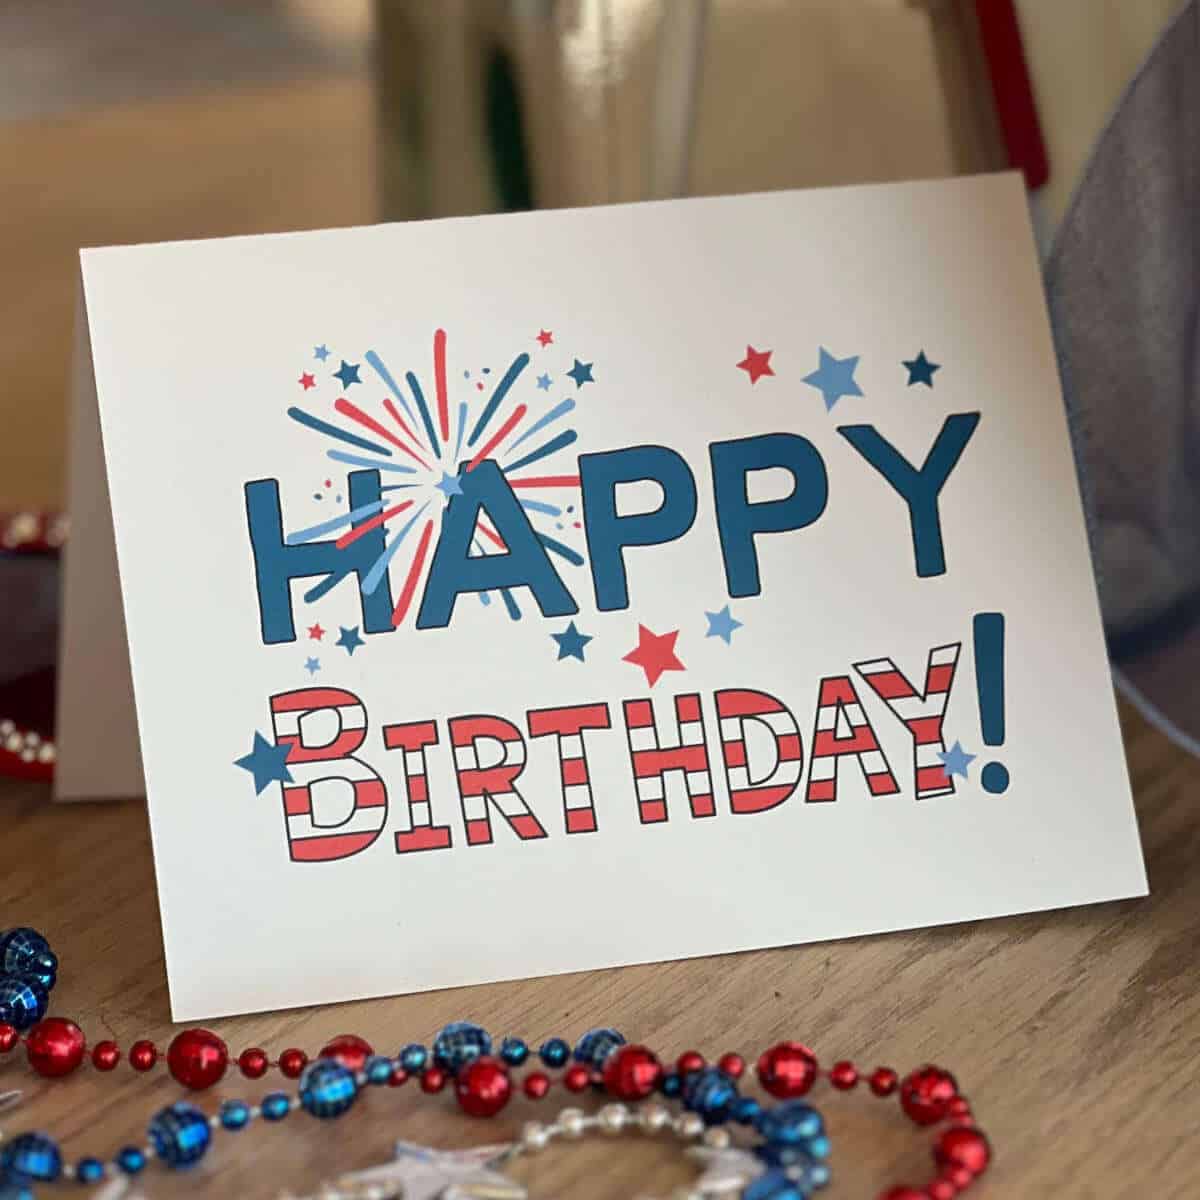 Printable Happy Birthday Card for the 4th of July sitting on a table next to red, white, and blue necklaces.